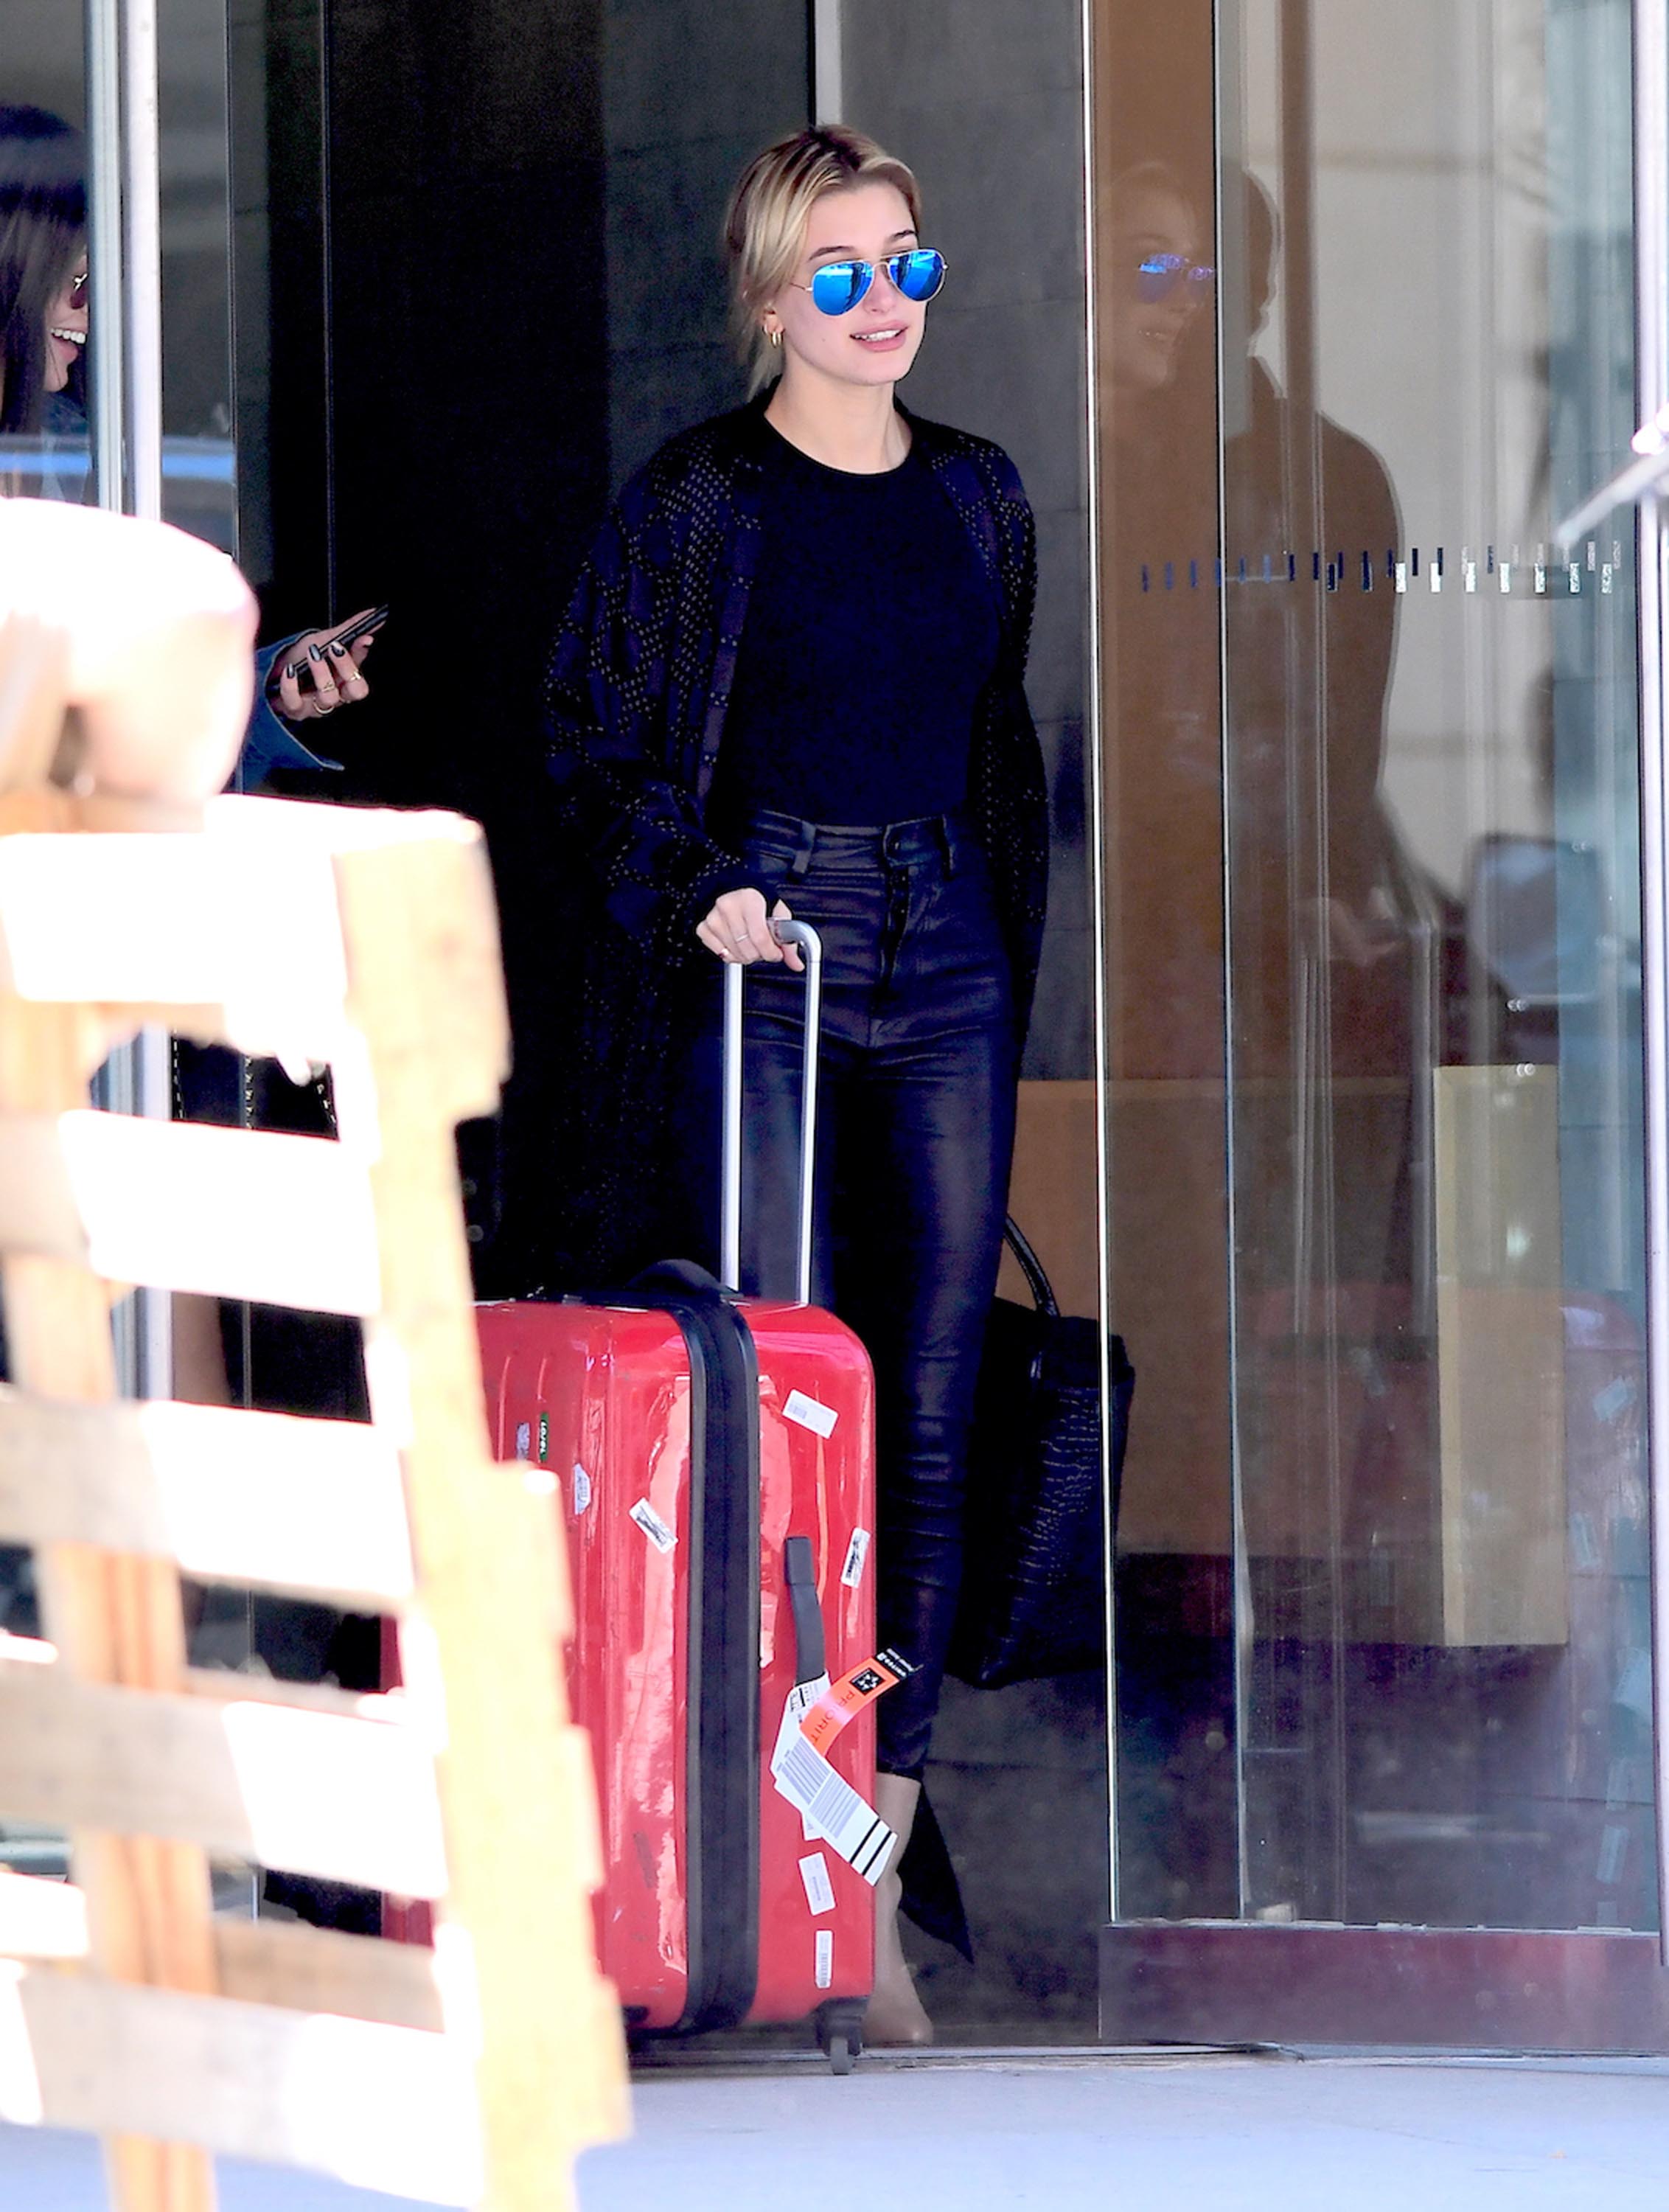 Hailey Baldwin was spotted catching an early morning flight in NYC